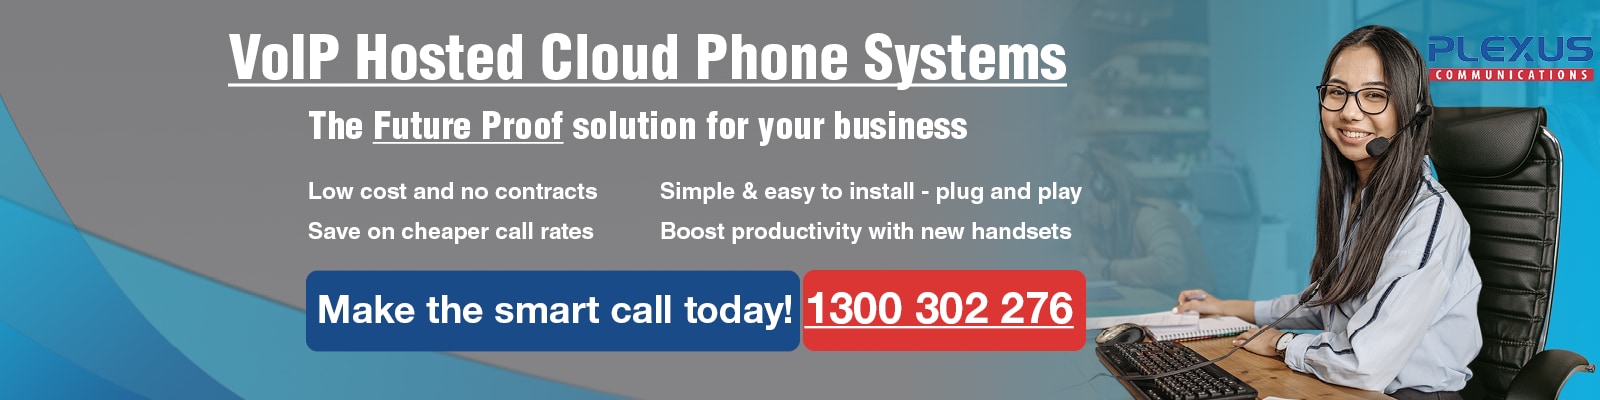 VoIP Hosted Phone System promo